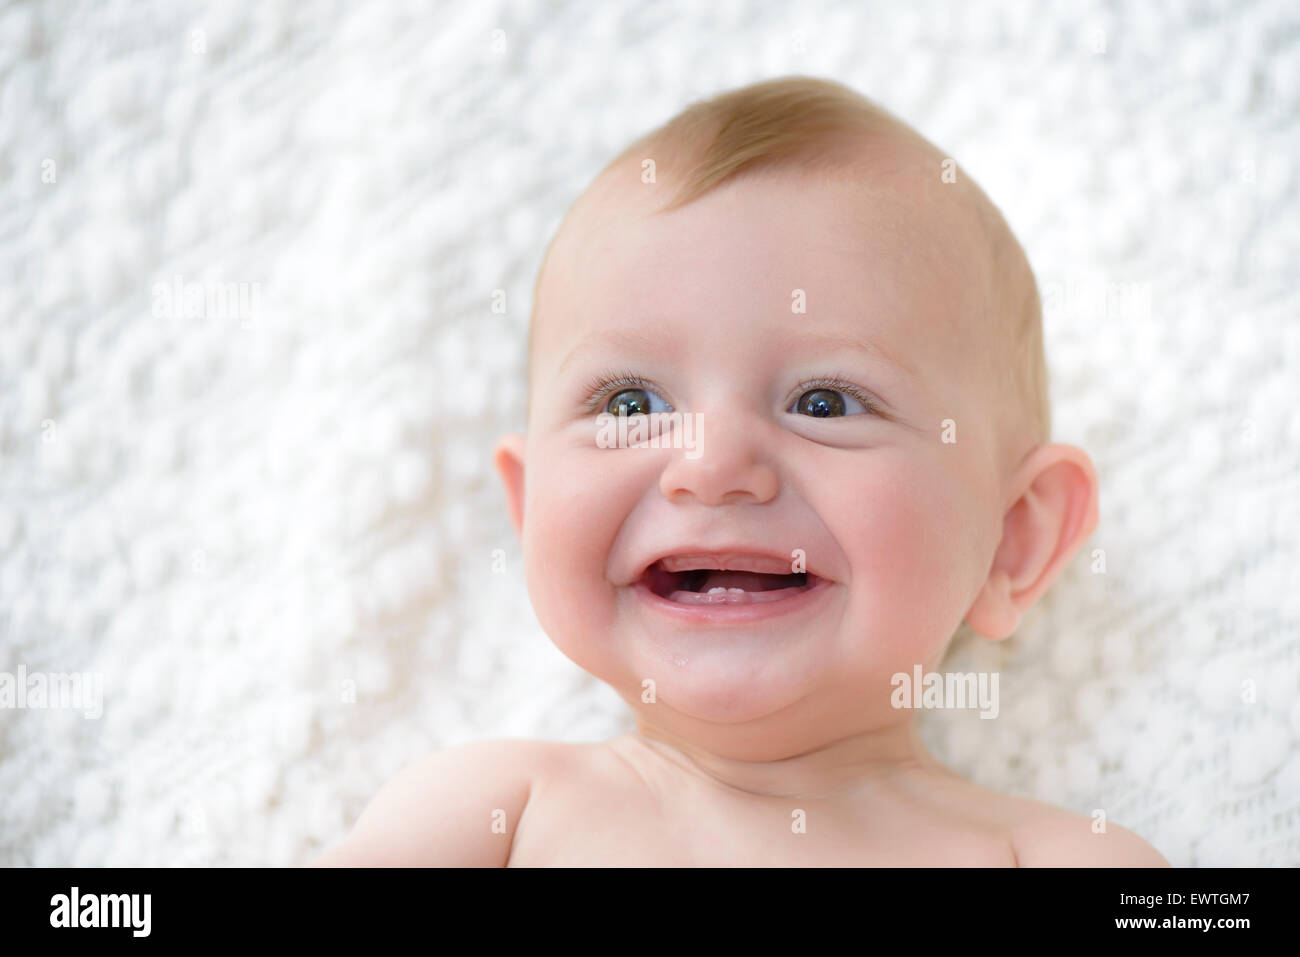 Cute baby laughing and showing his first teeth Stock Photo